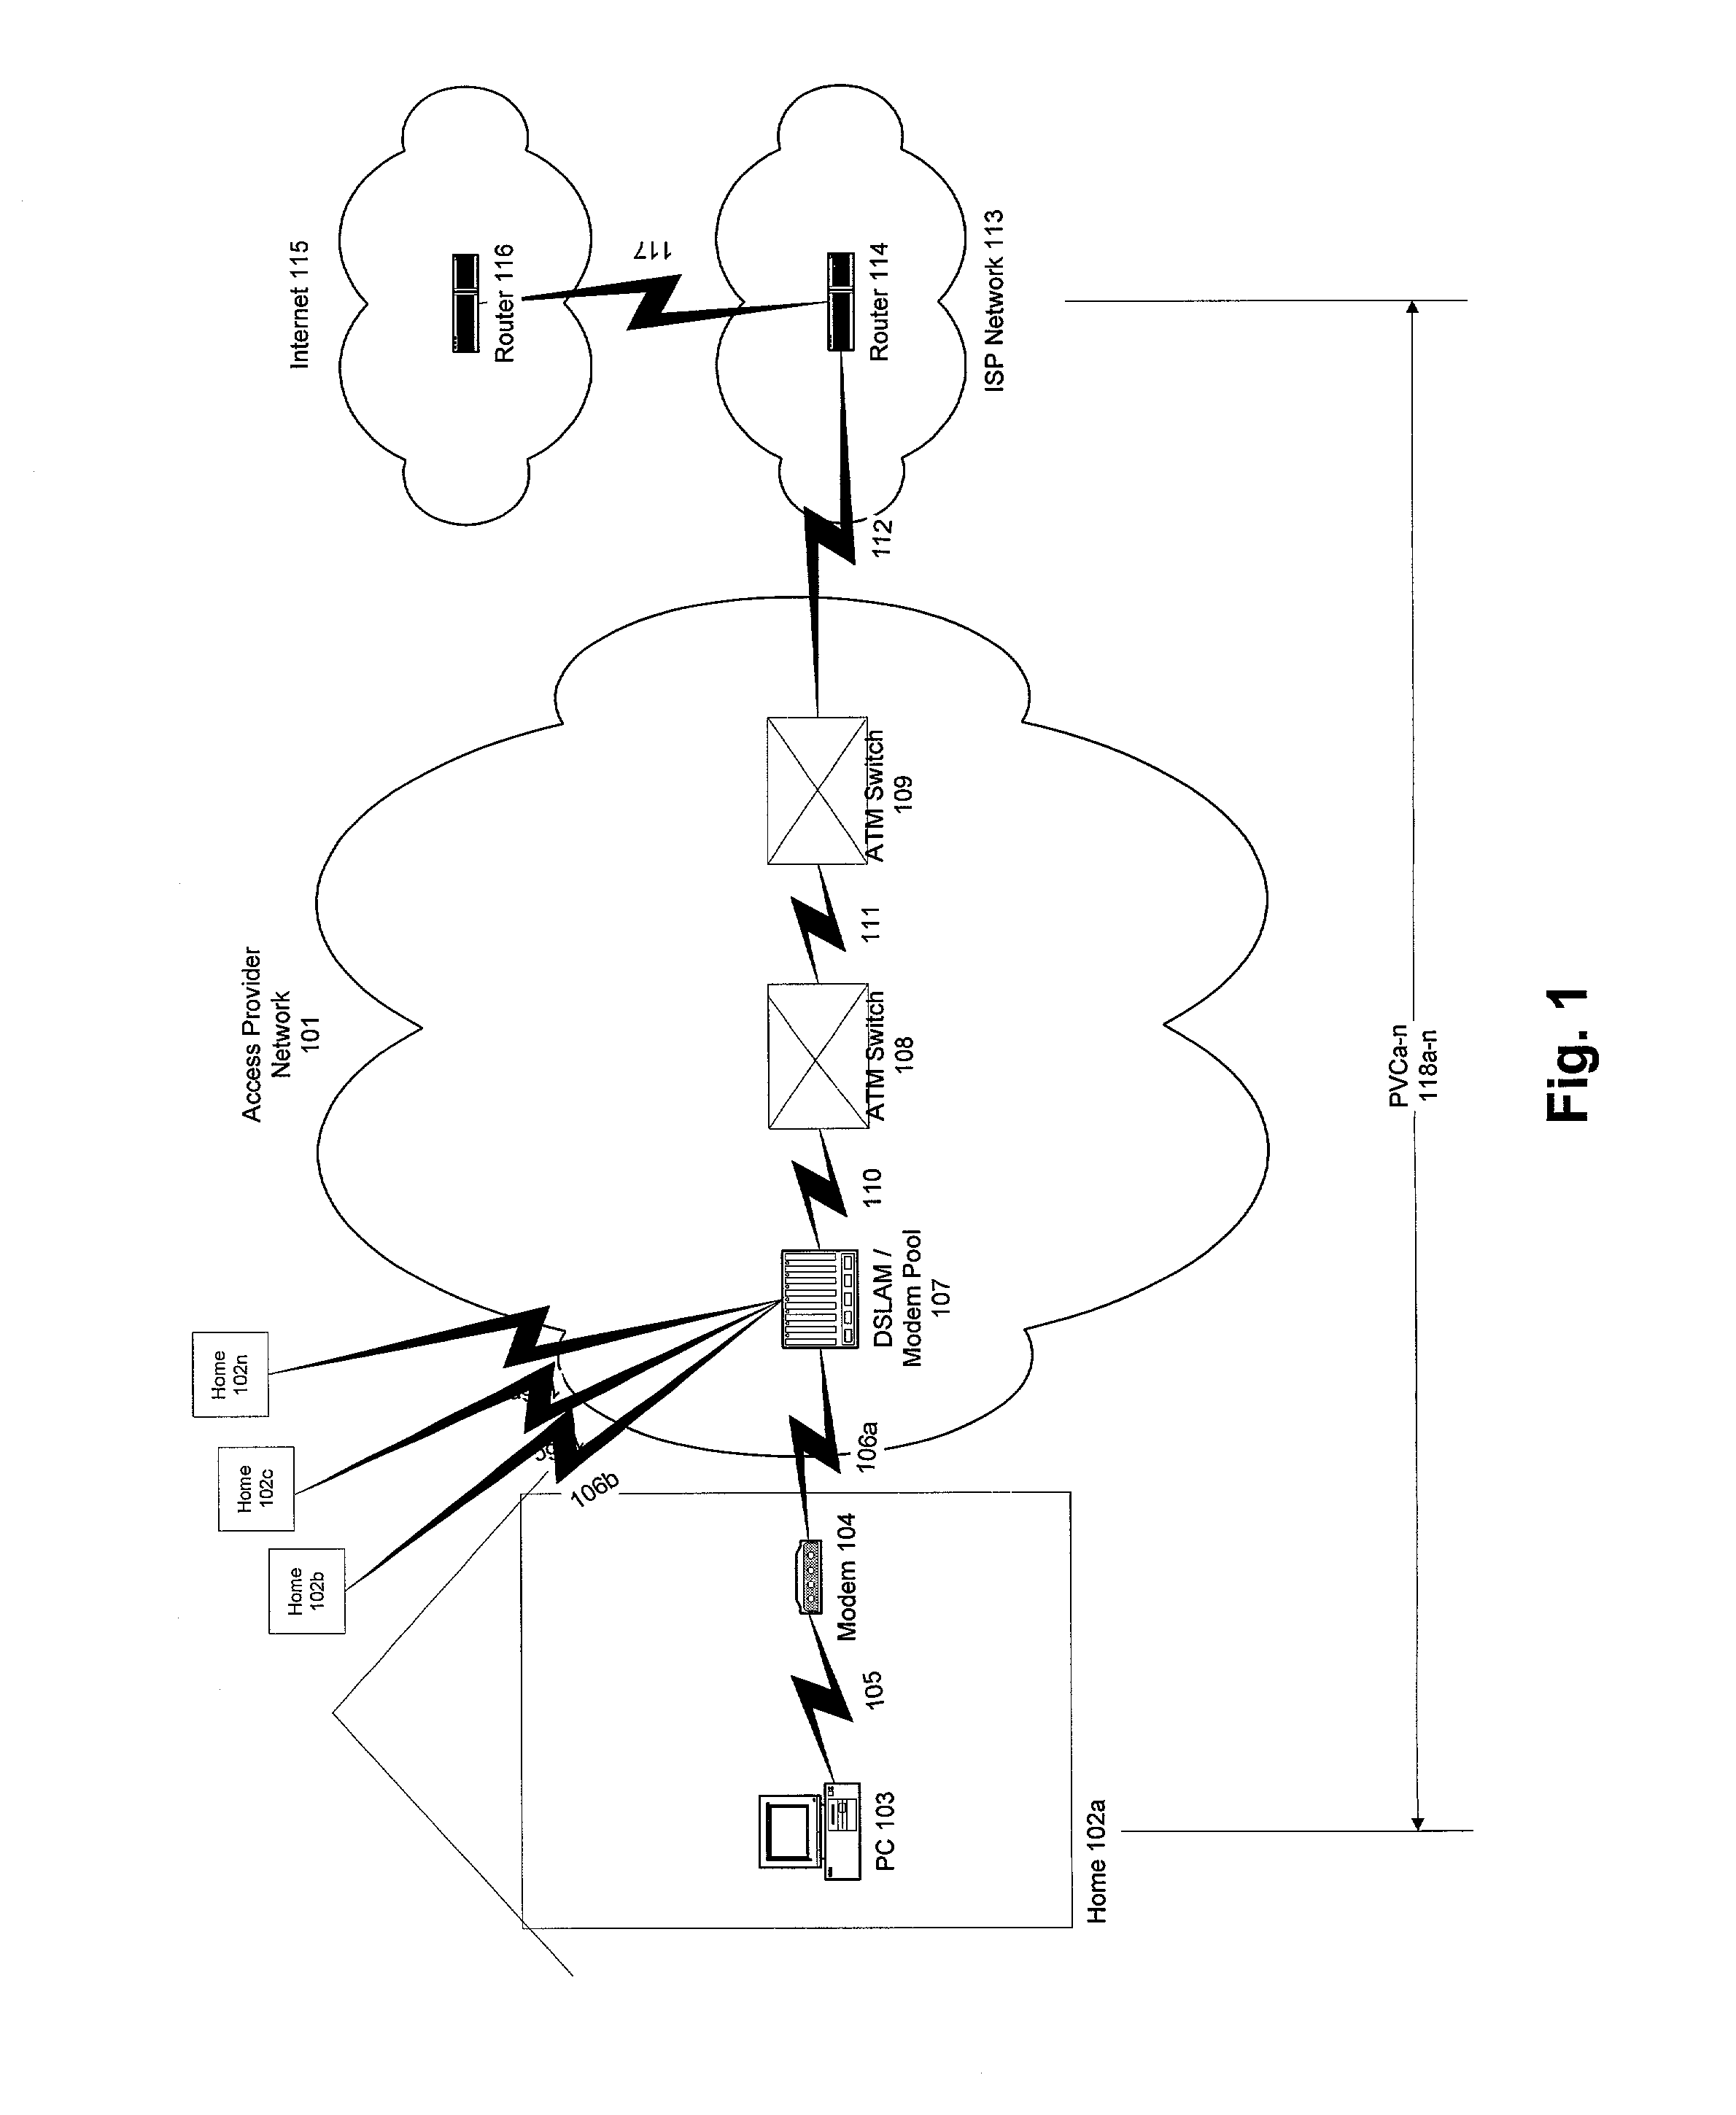 System and method for providing network and service access independent of an internet service provider